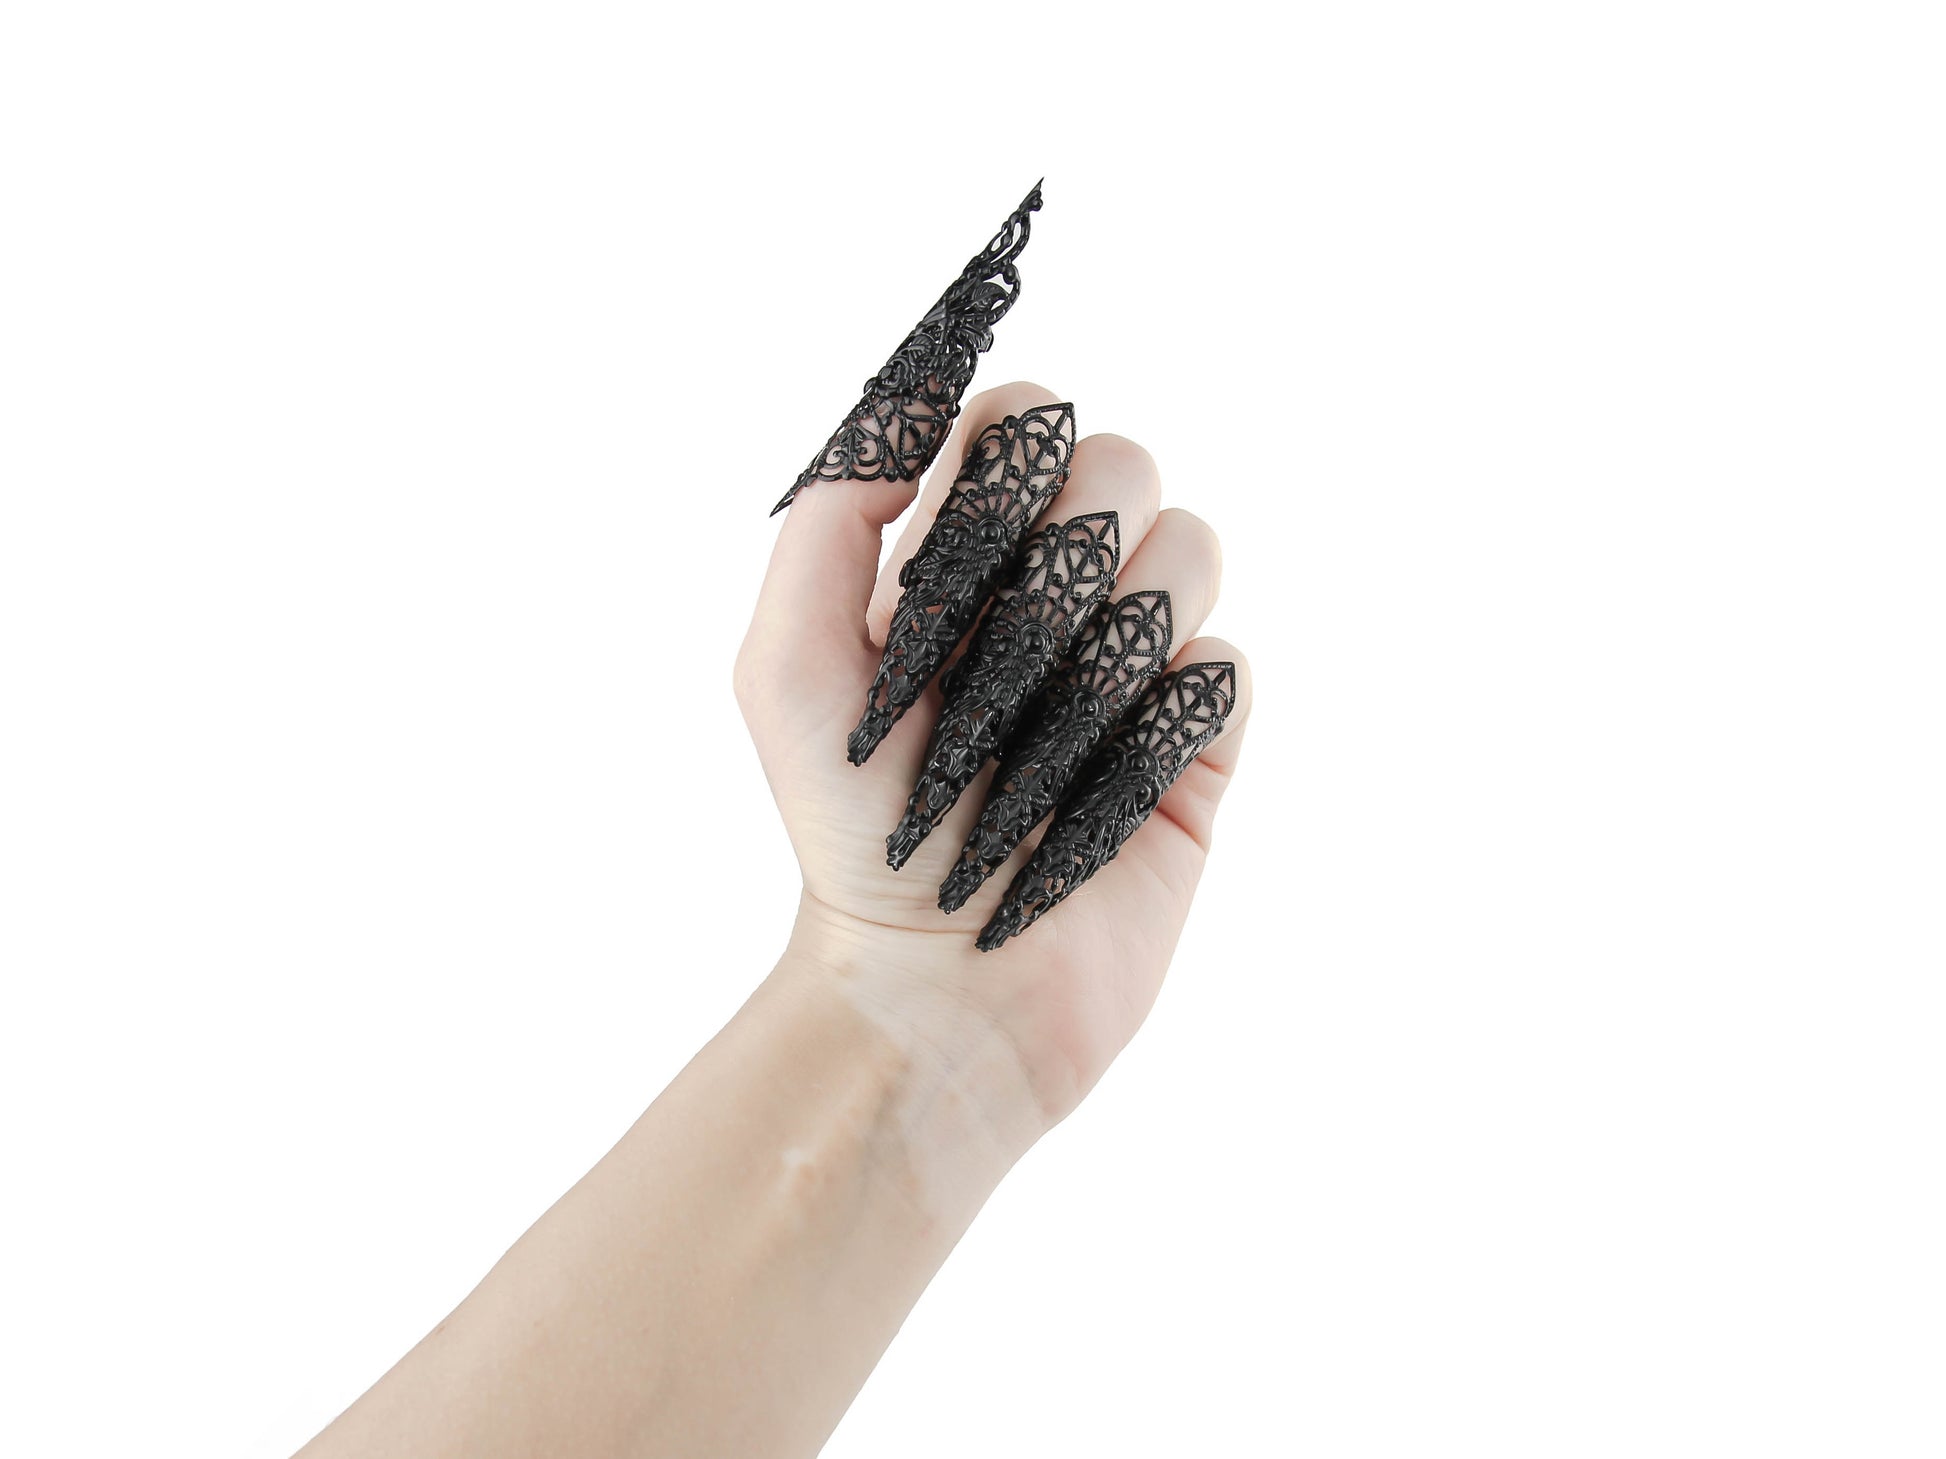 A full hand set of extra-long black nail claws by Myril Jewels showcases a bold neo-goth design, ideal for anyone with a love for dark, statement jewelry. Perfect for Halloween or as a standout accessory at a rave party, these claws encapsulate gothic-chic and witchcore styles, making them a unique gift for the goth girlfriend or for dramatic festival wear.